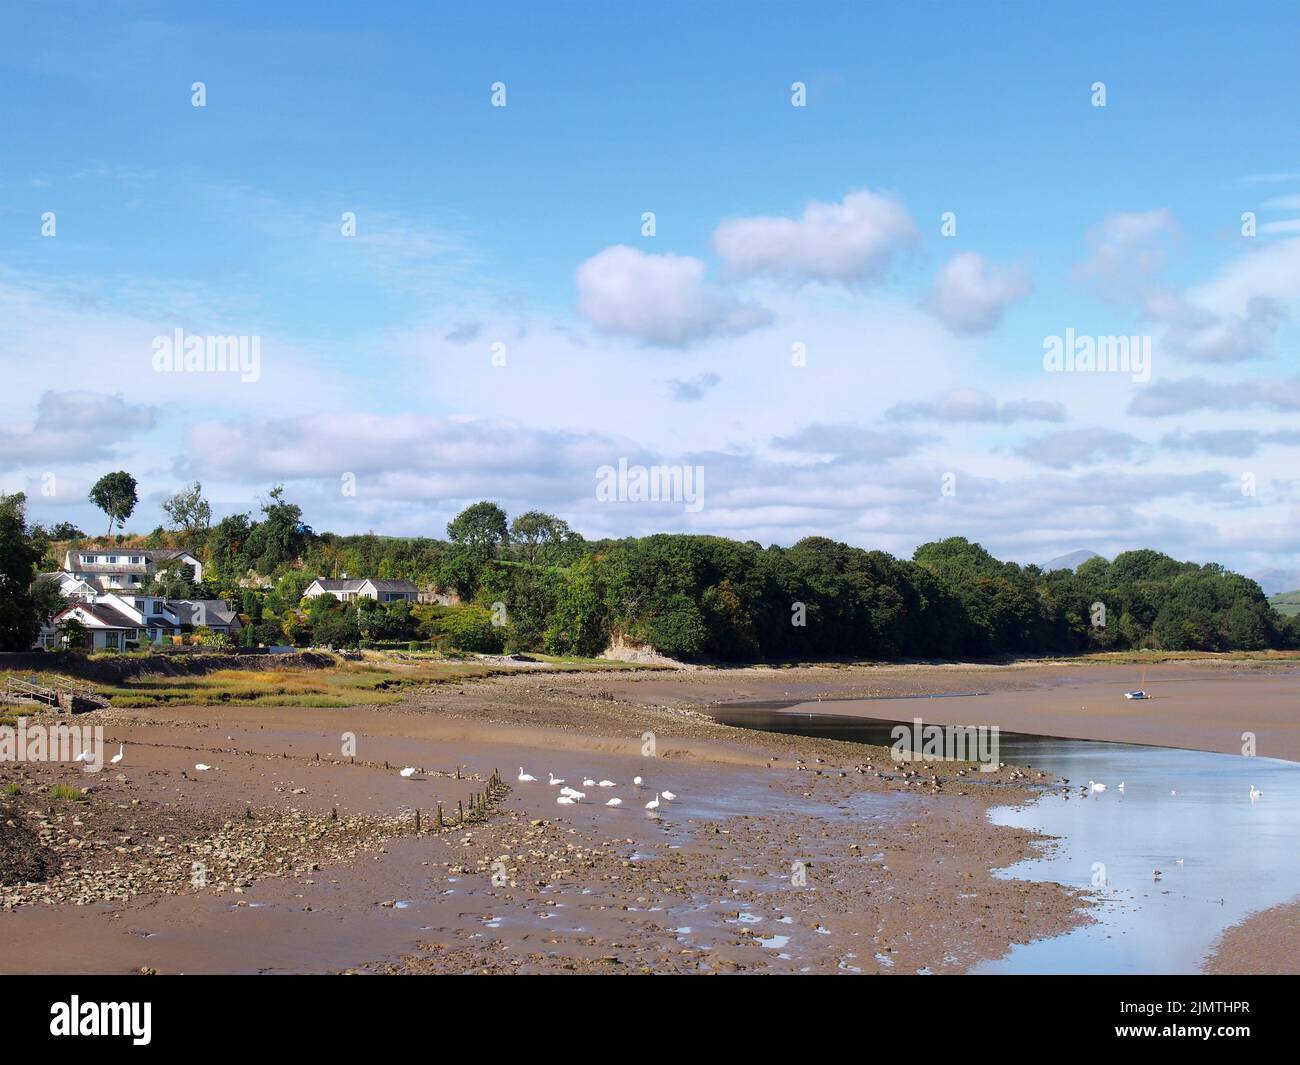 Summer scenic view of the beach at ulverston in cumbria at low tide with houses and trees along shore and swans on the sand Stock Photo